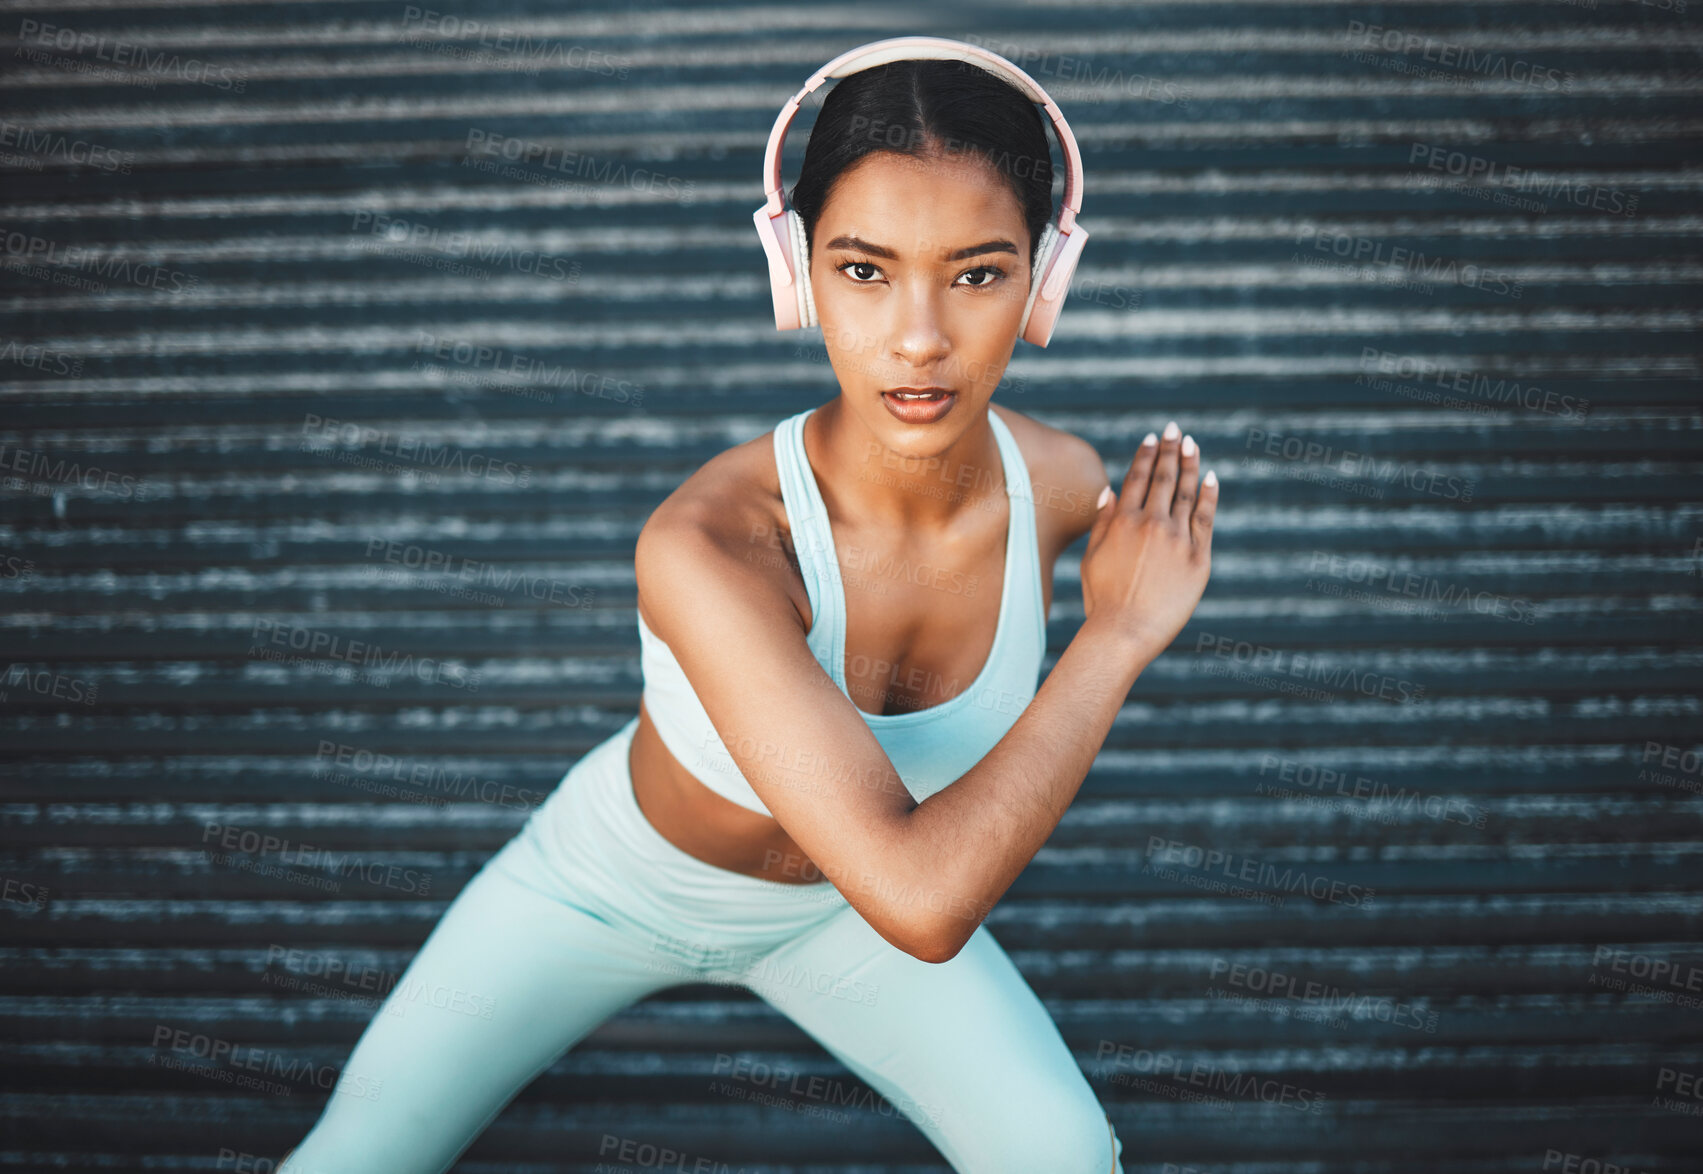 Buy stock photo Fitness portrait of black woman with music headphones for exercise, sports training or body workout motivation. Cardio running, wellness health or runner girl listening to radio song or audio podcast